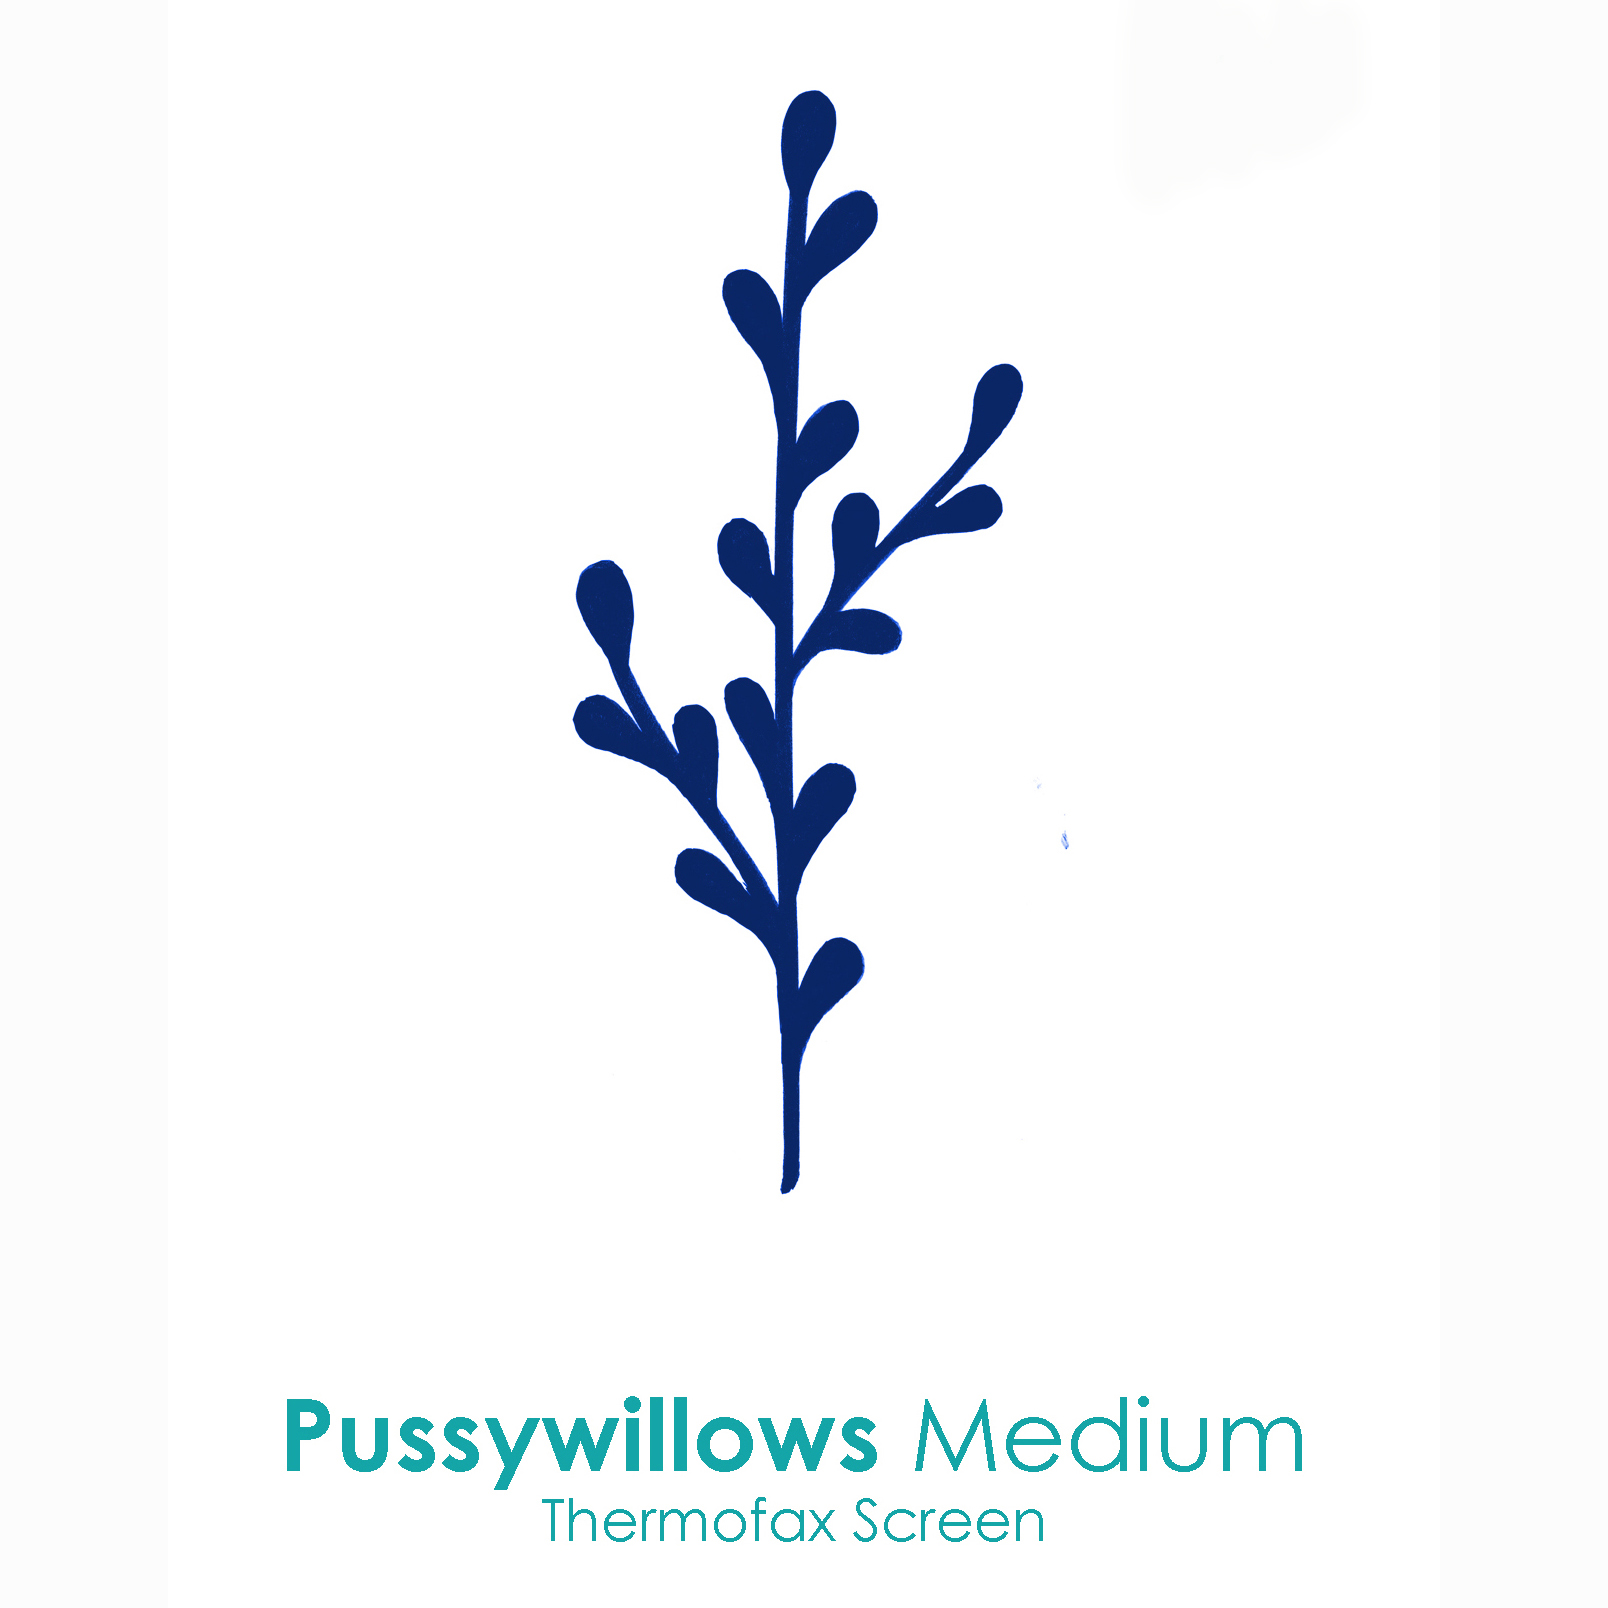 Pussywillows thermofax screen.